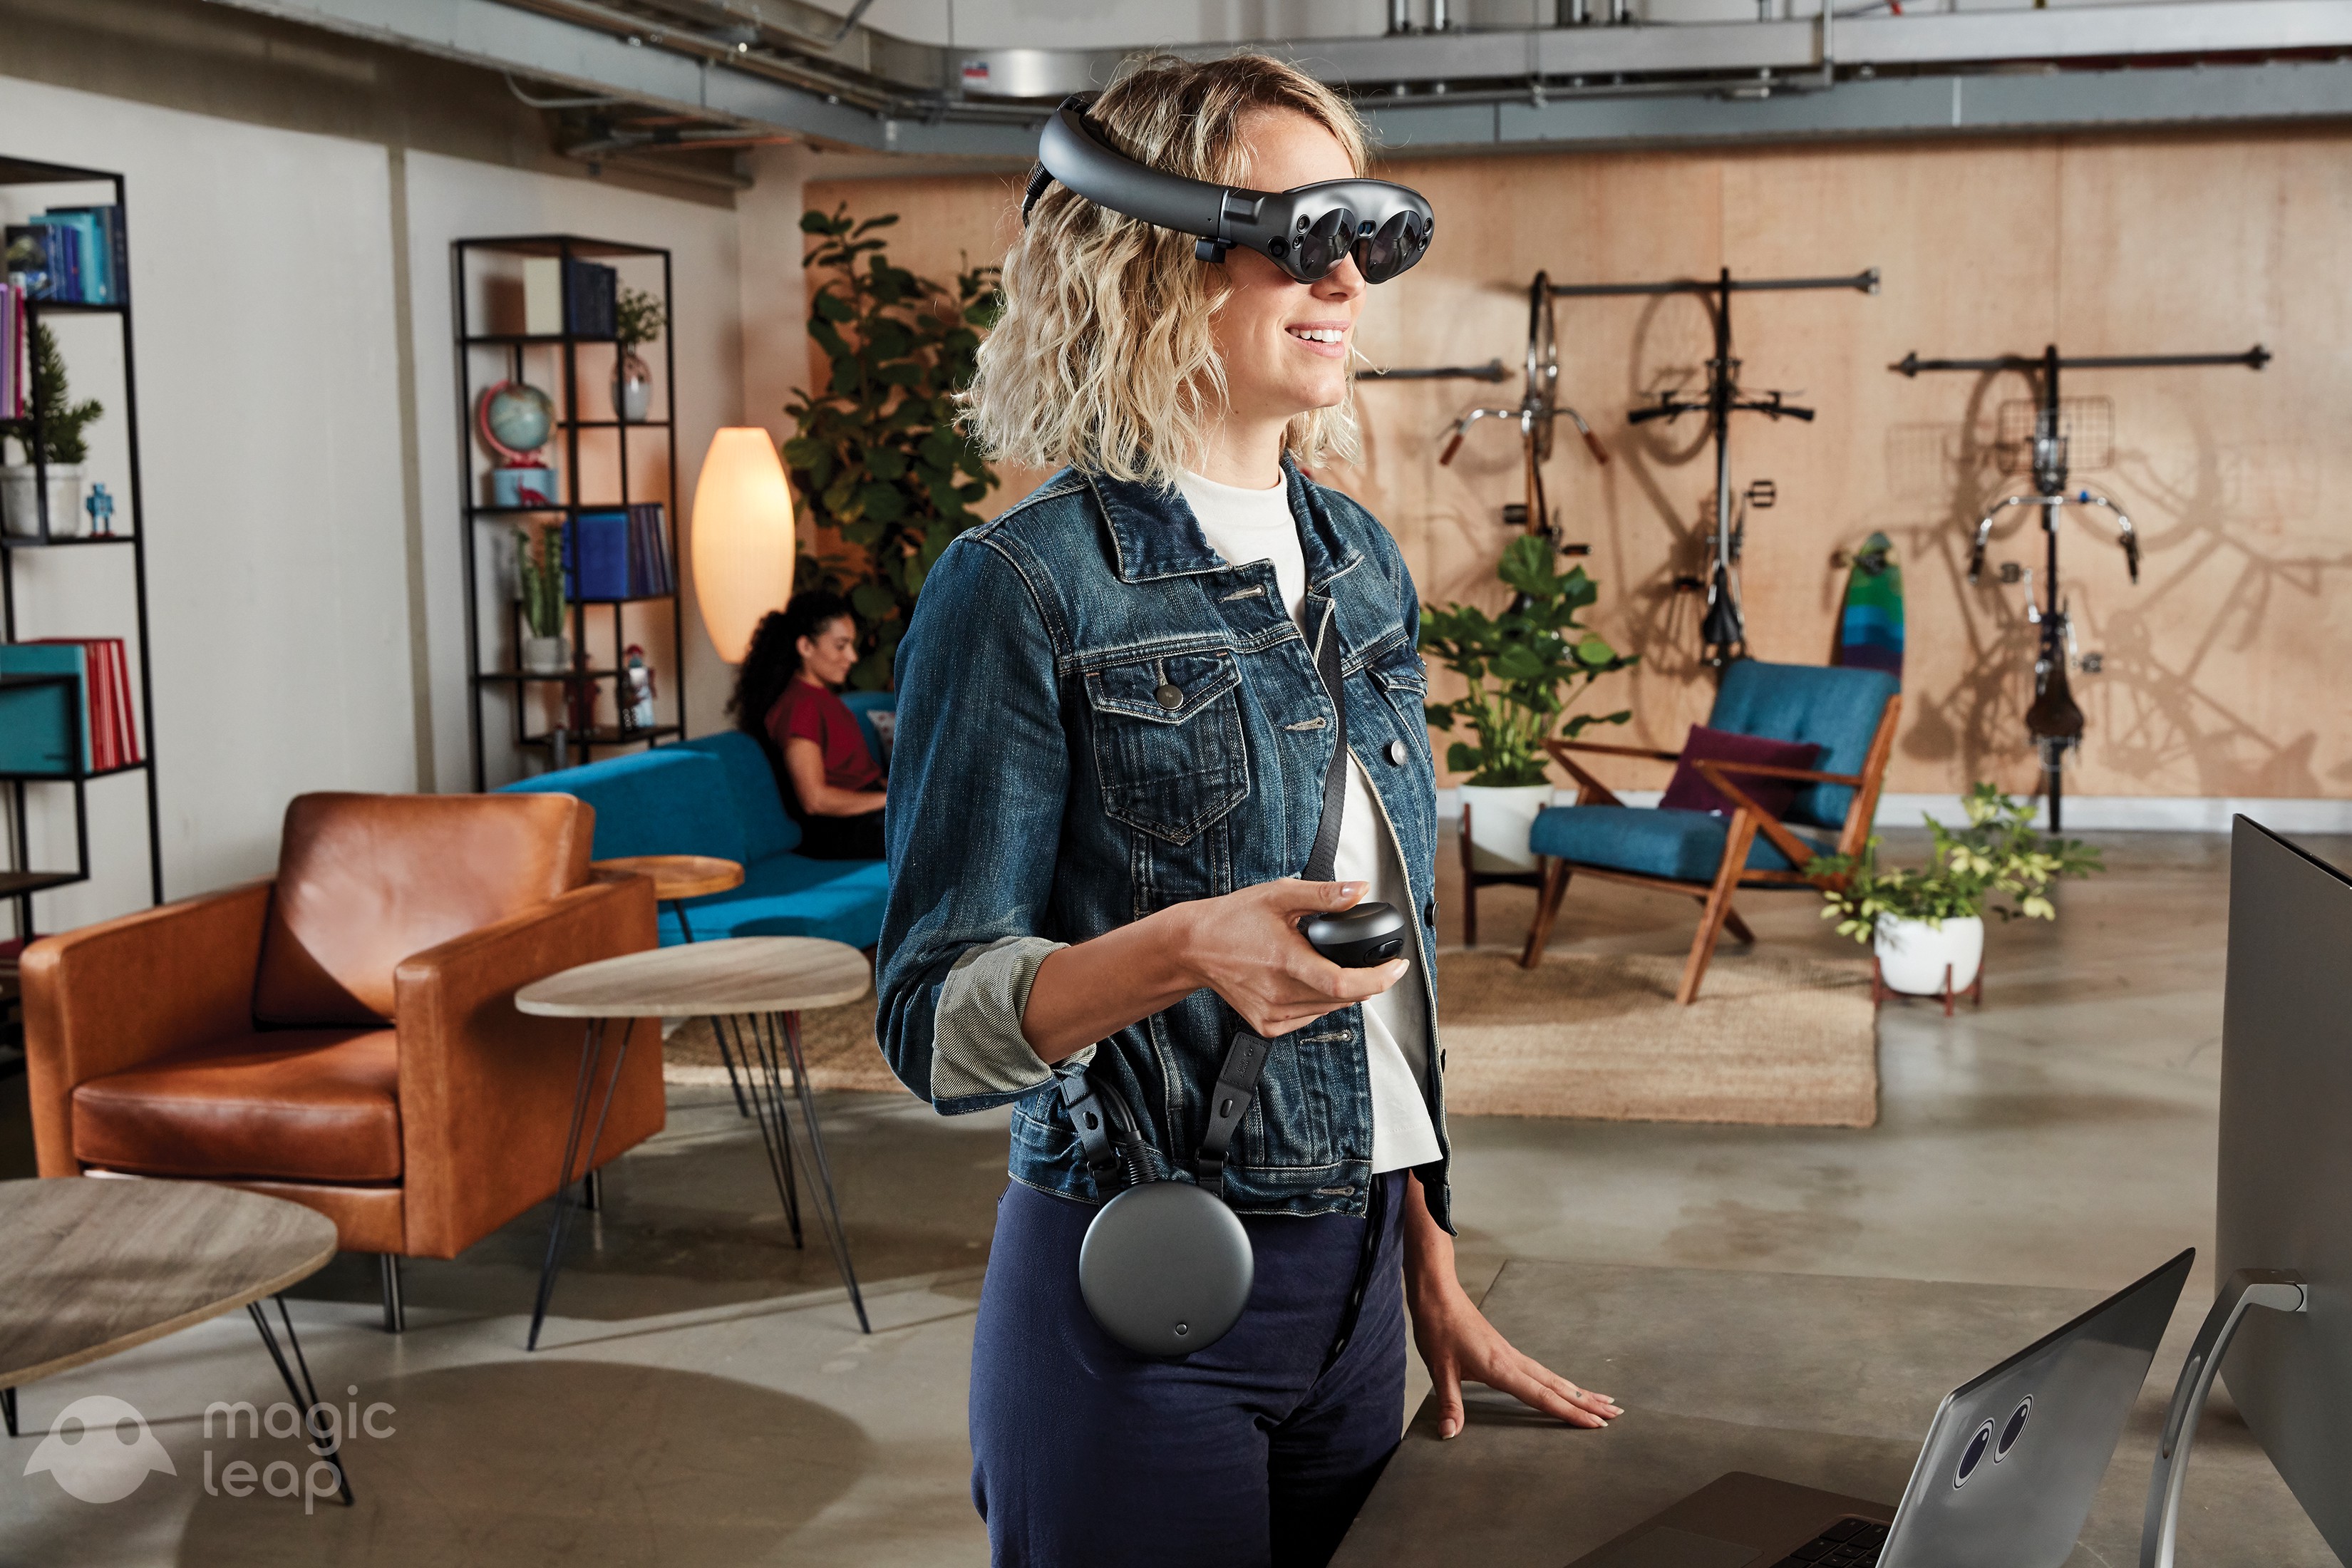 What can we do with a Magic Leap ?